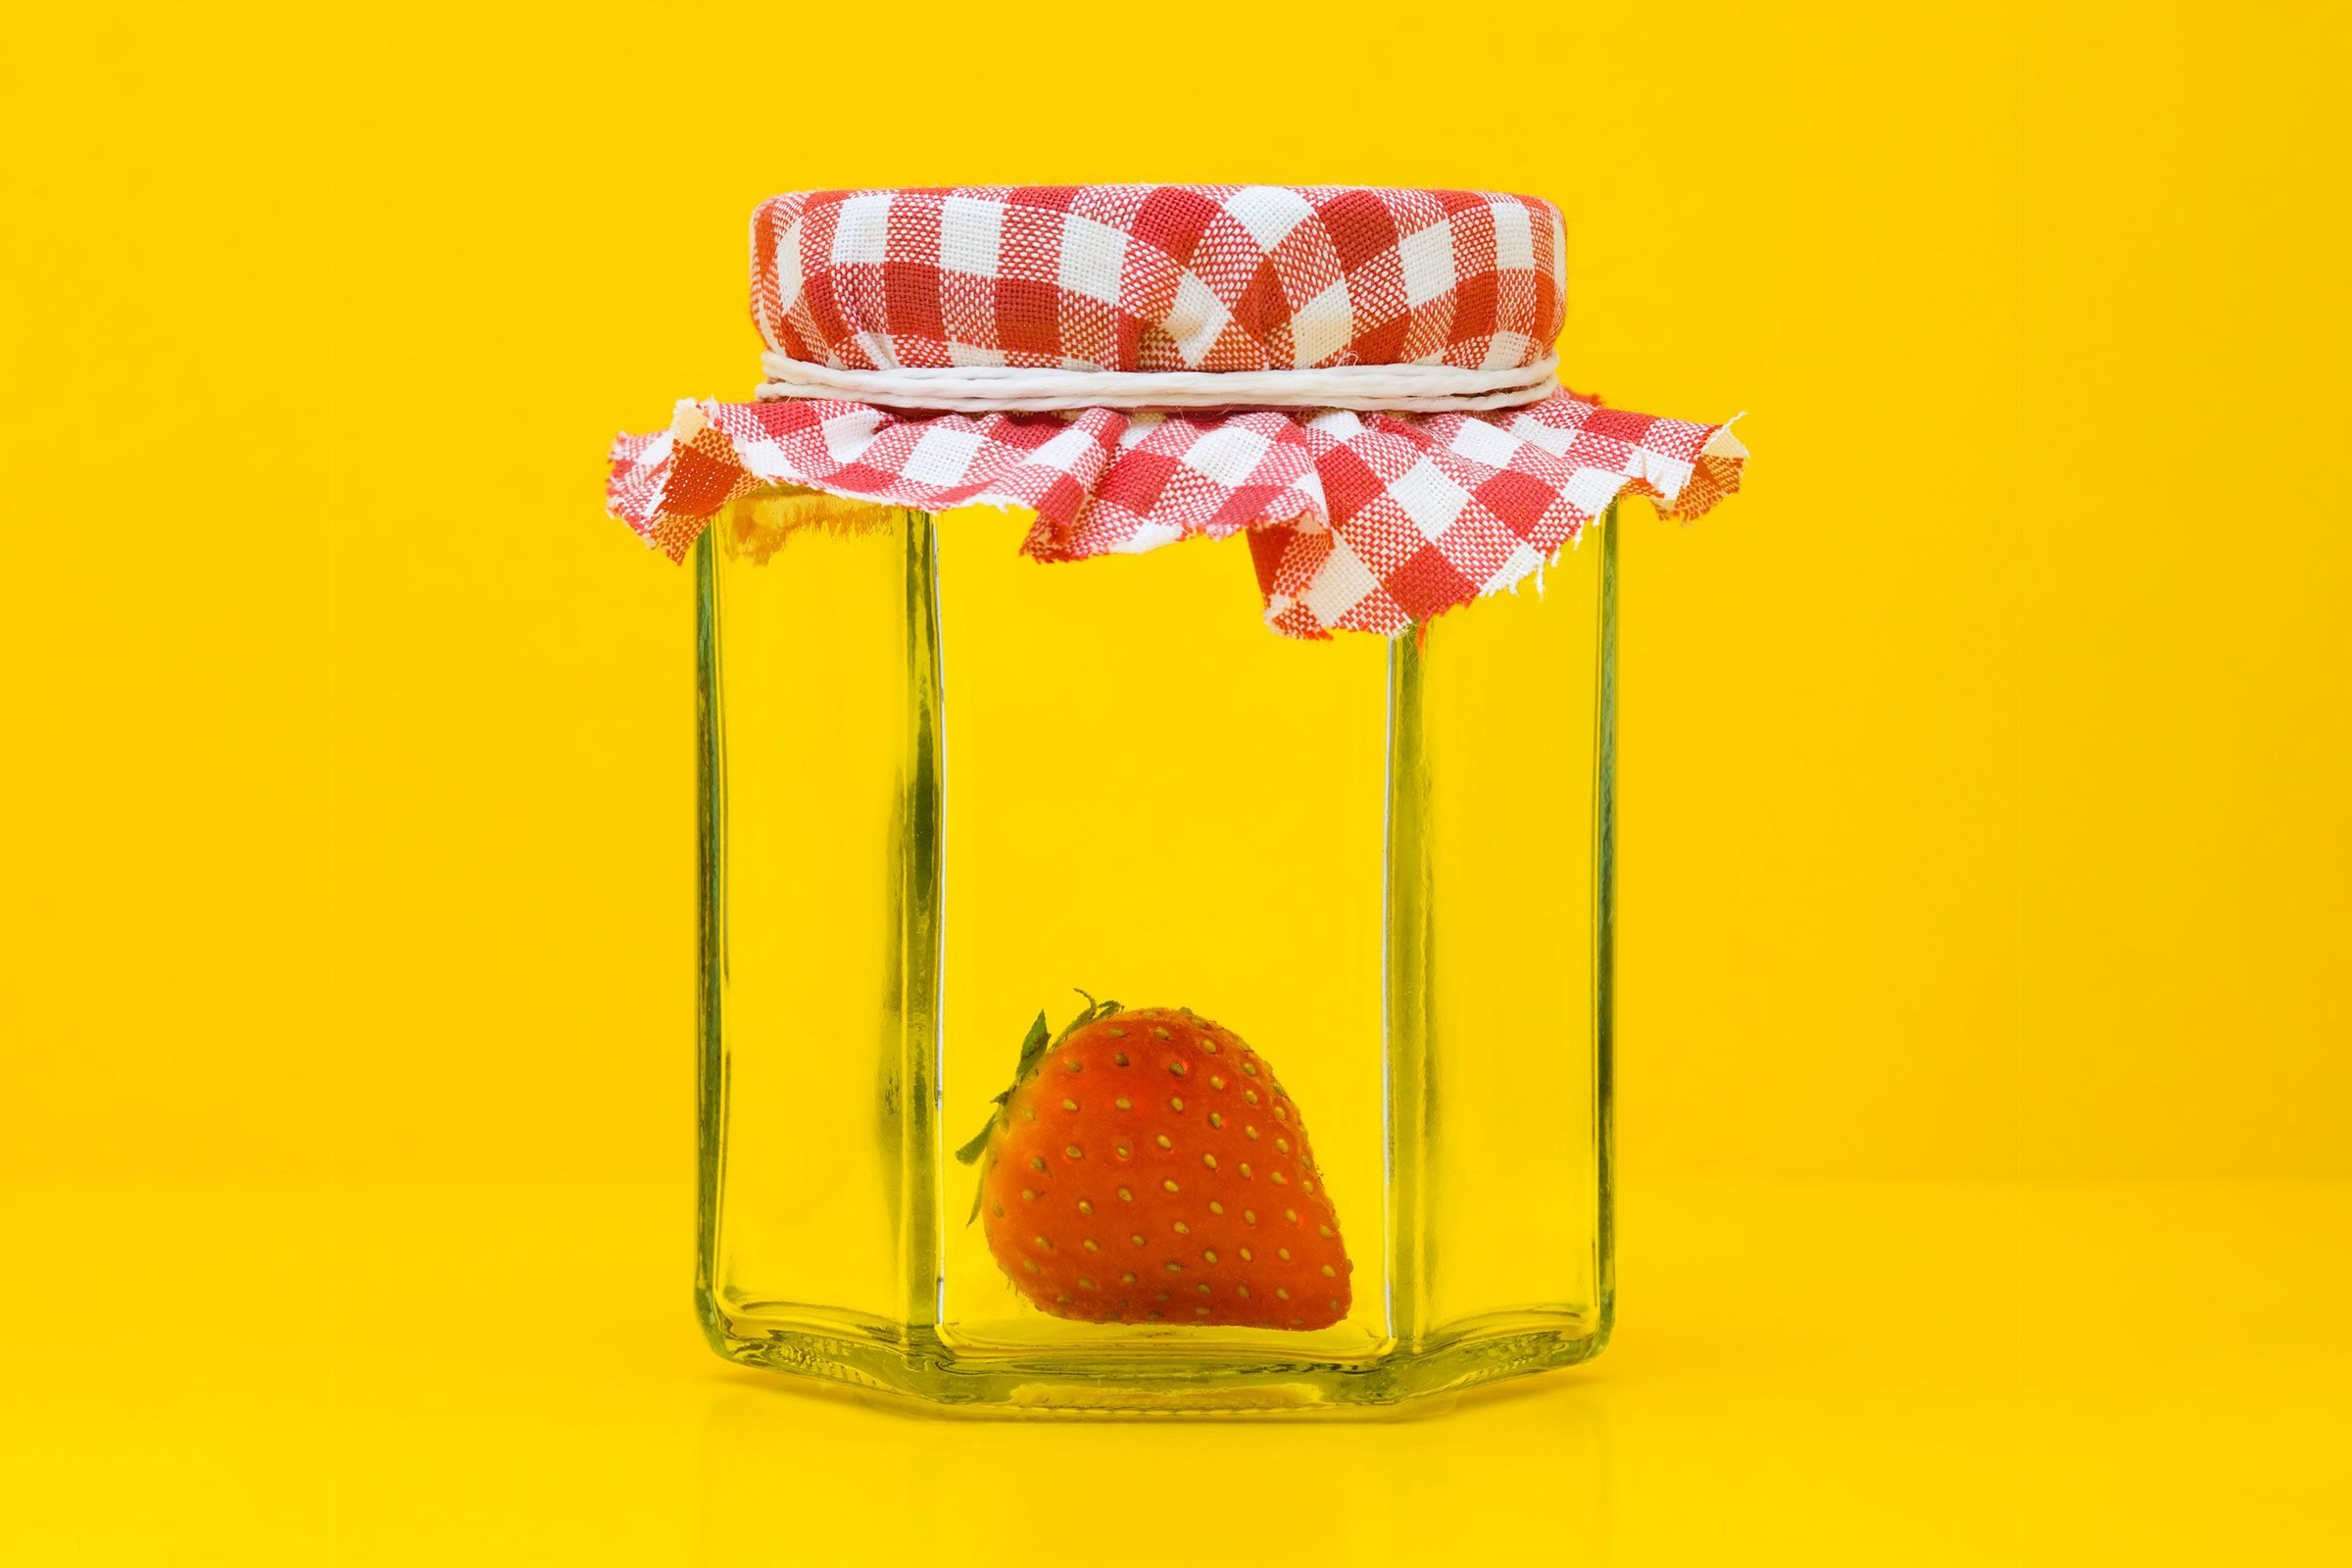 a single fresh strawberry inside a glass jar used for jam or jelly on a yellow background